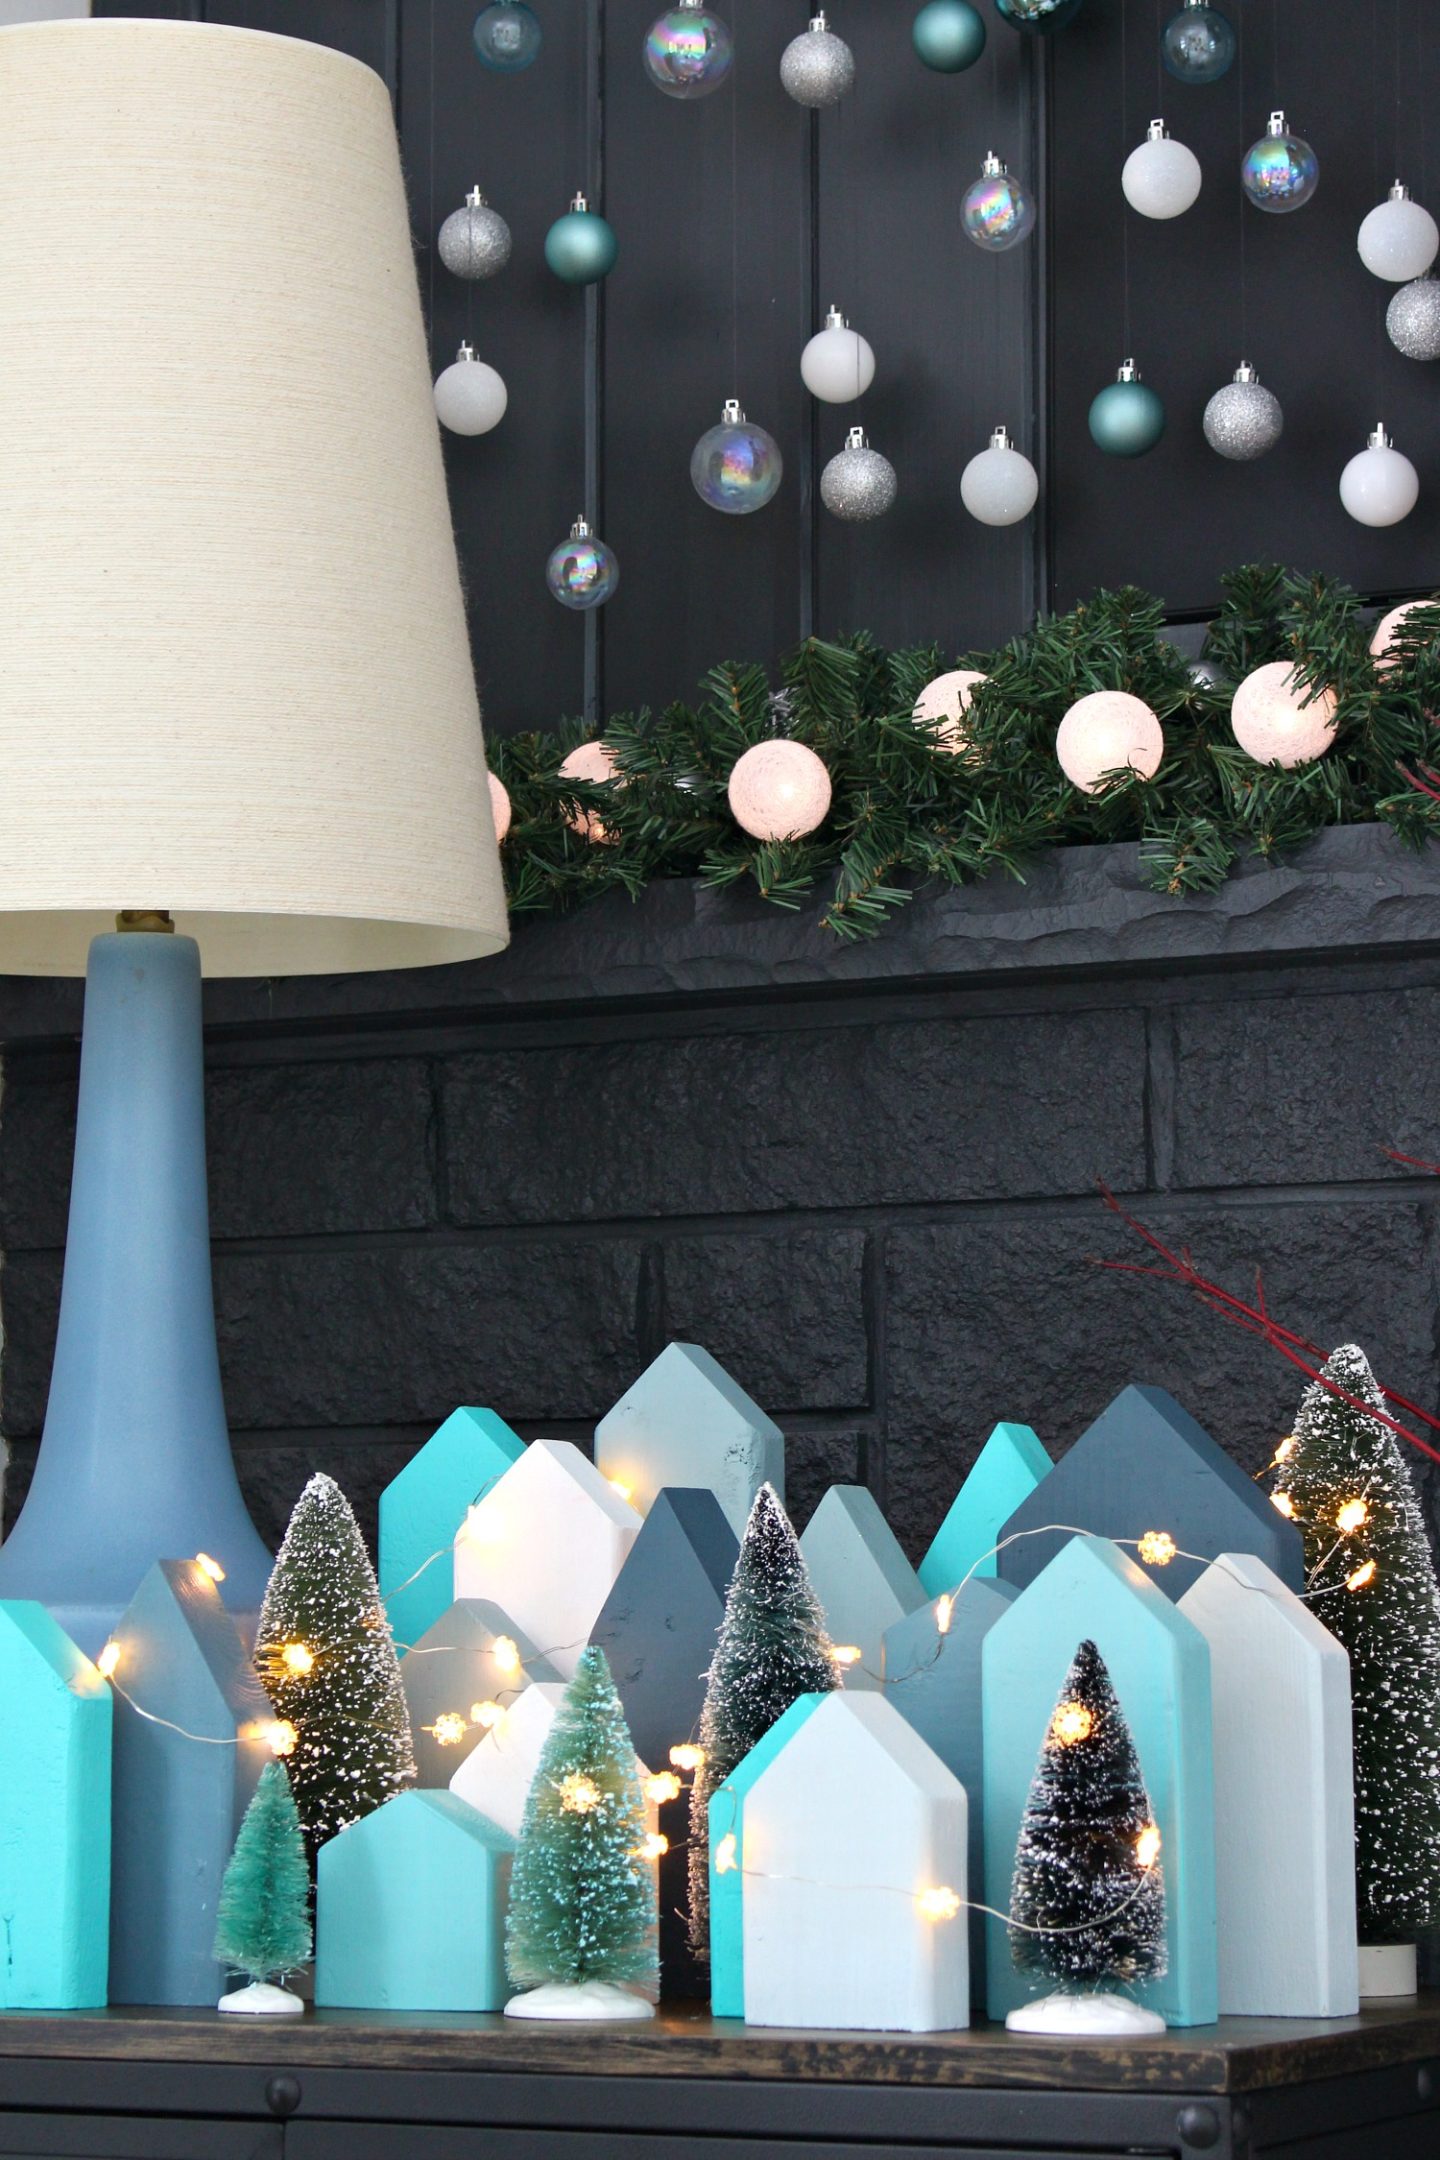 Learn How to Make This DIY Holiday Village